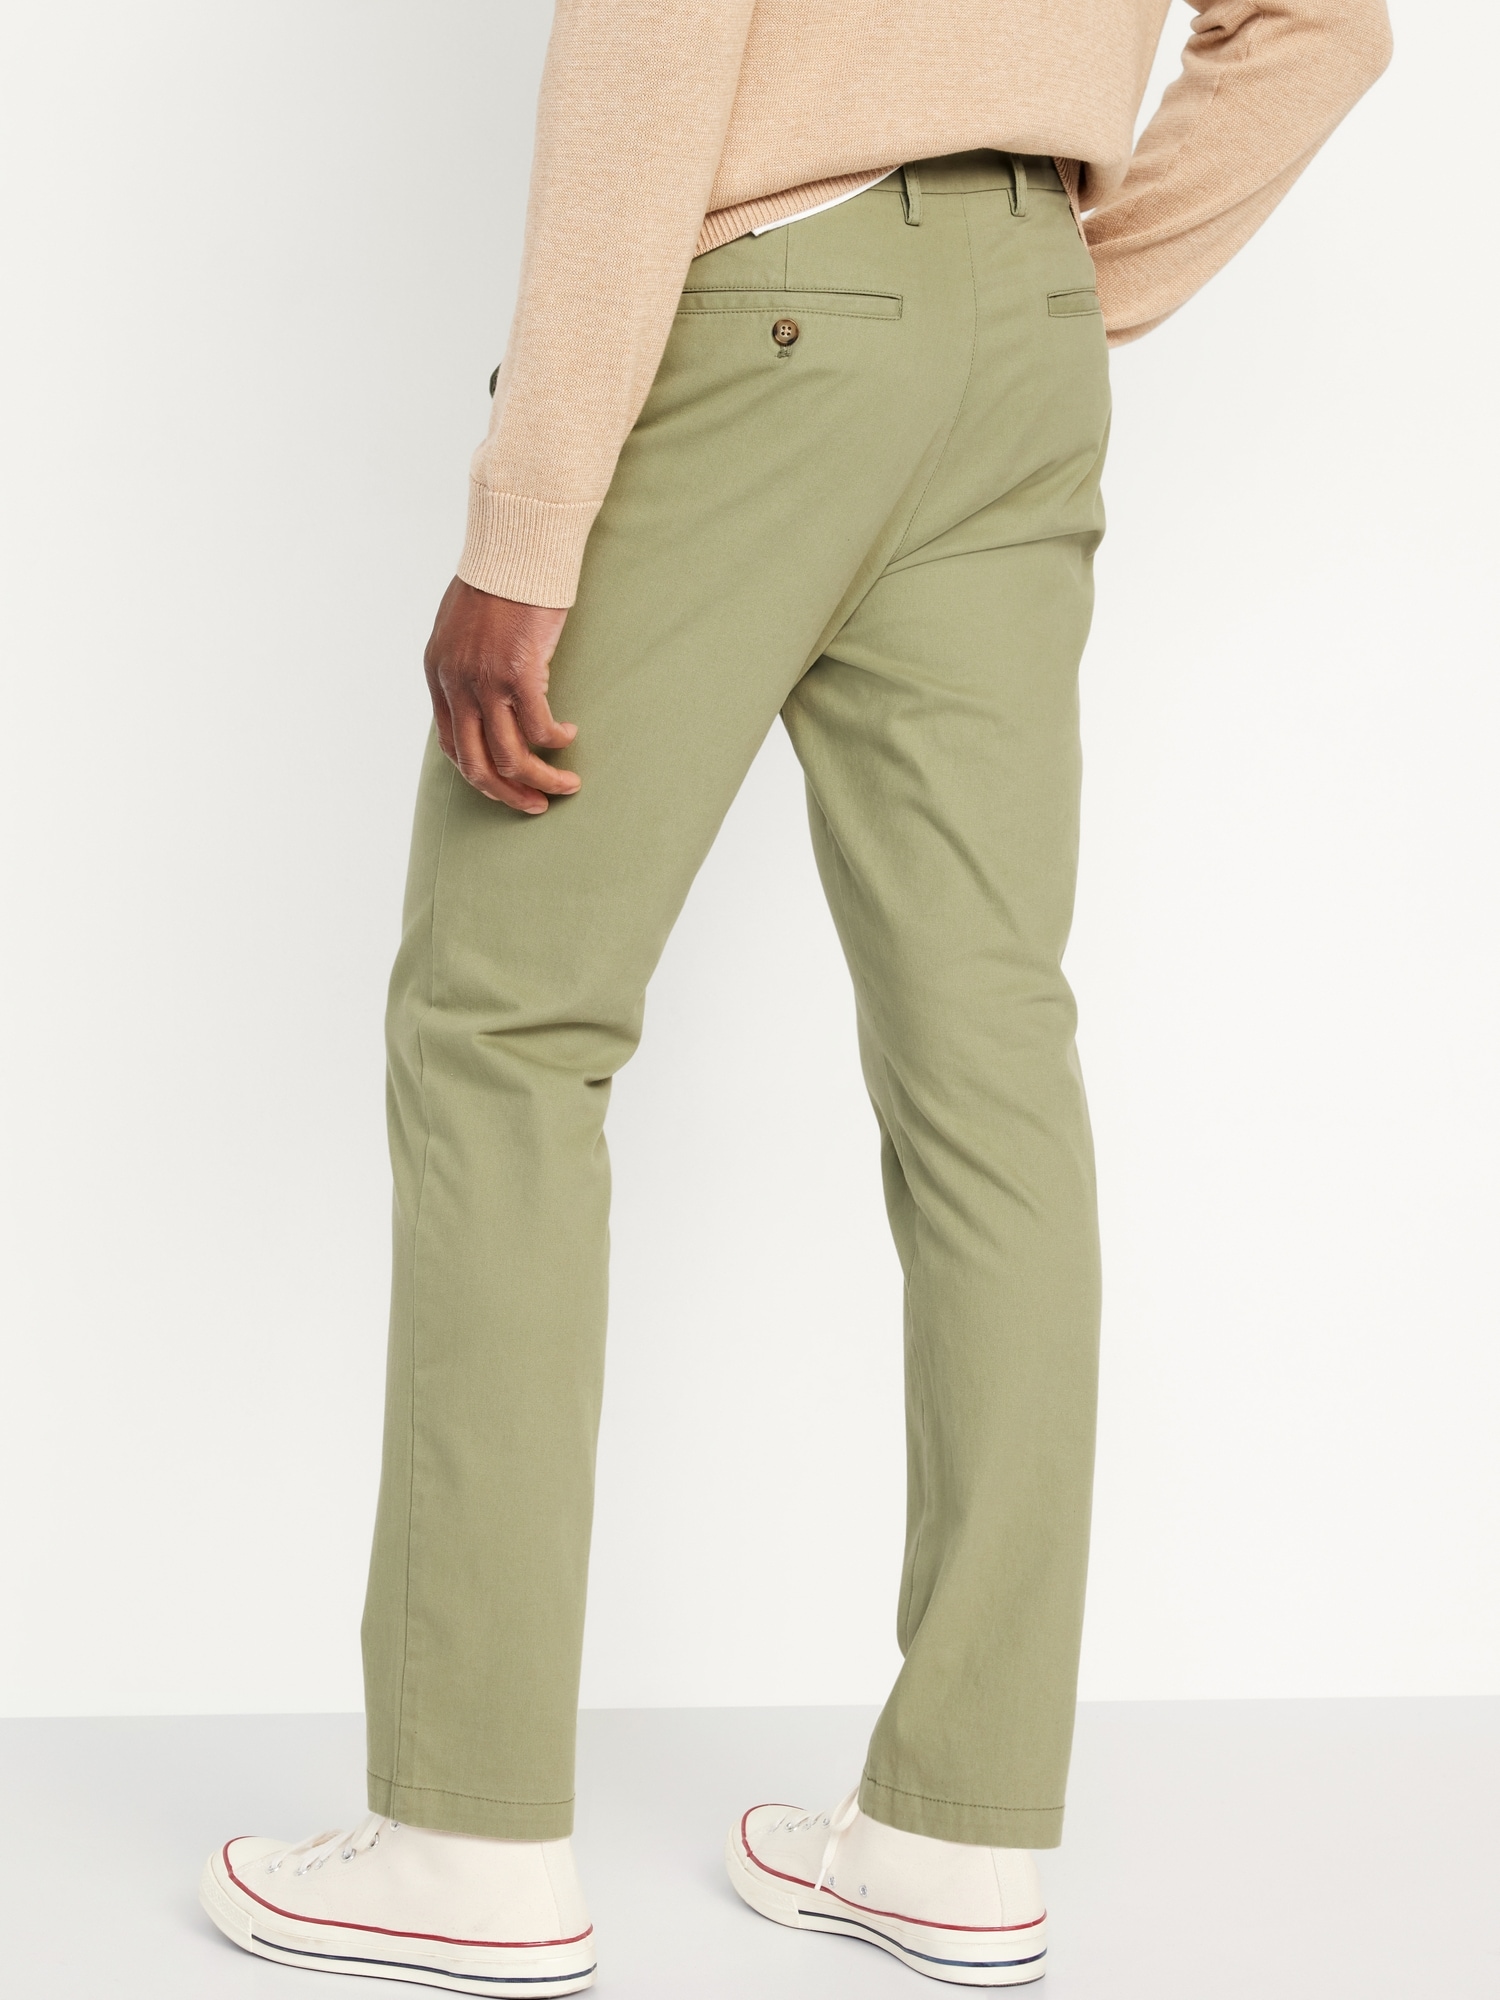 Slim Built-In Flex Rotation Chino Pants | Old Navy